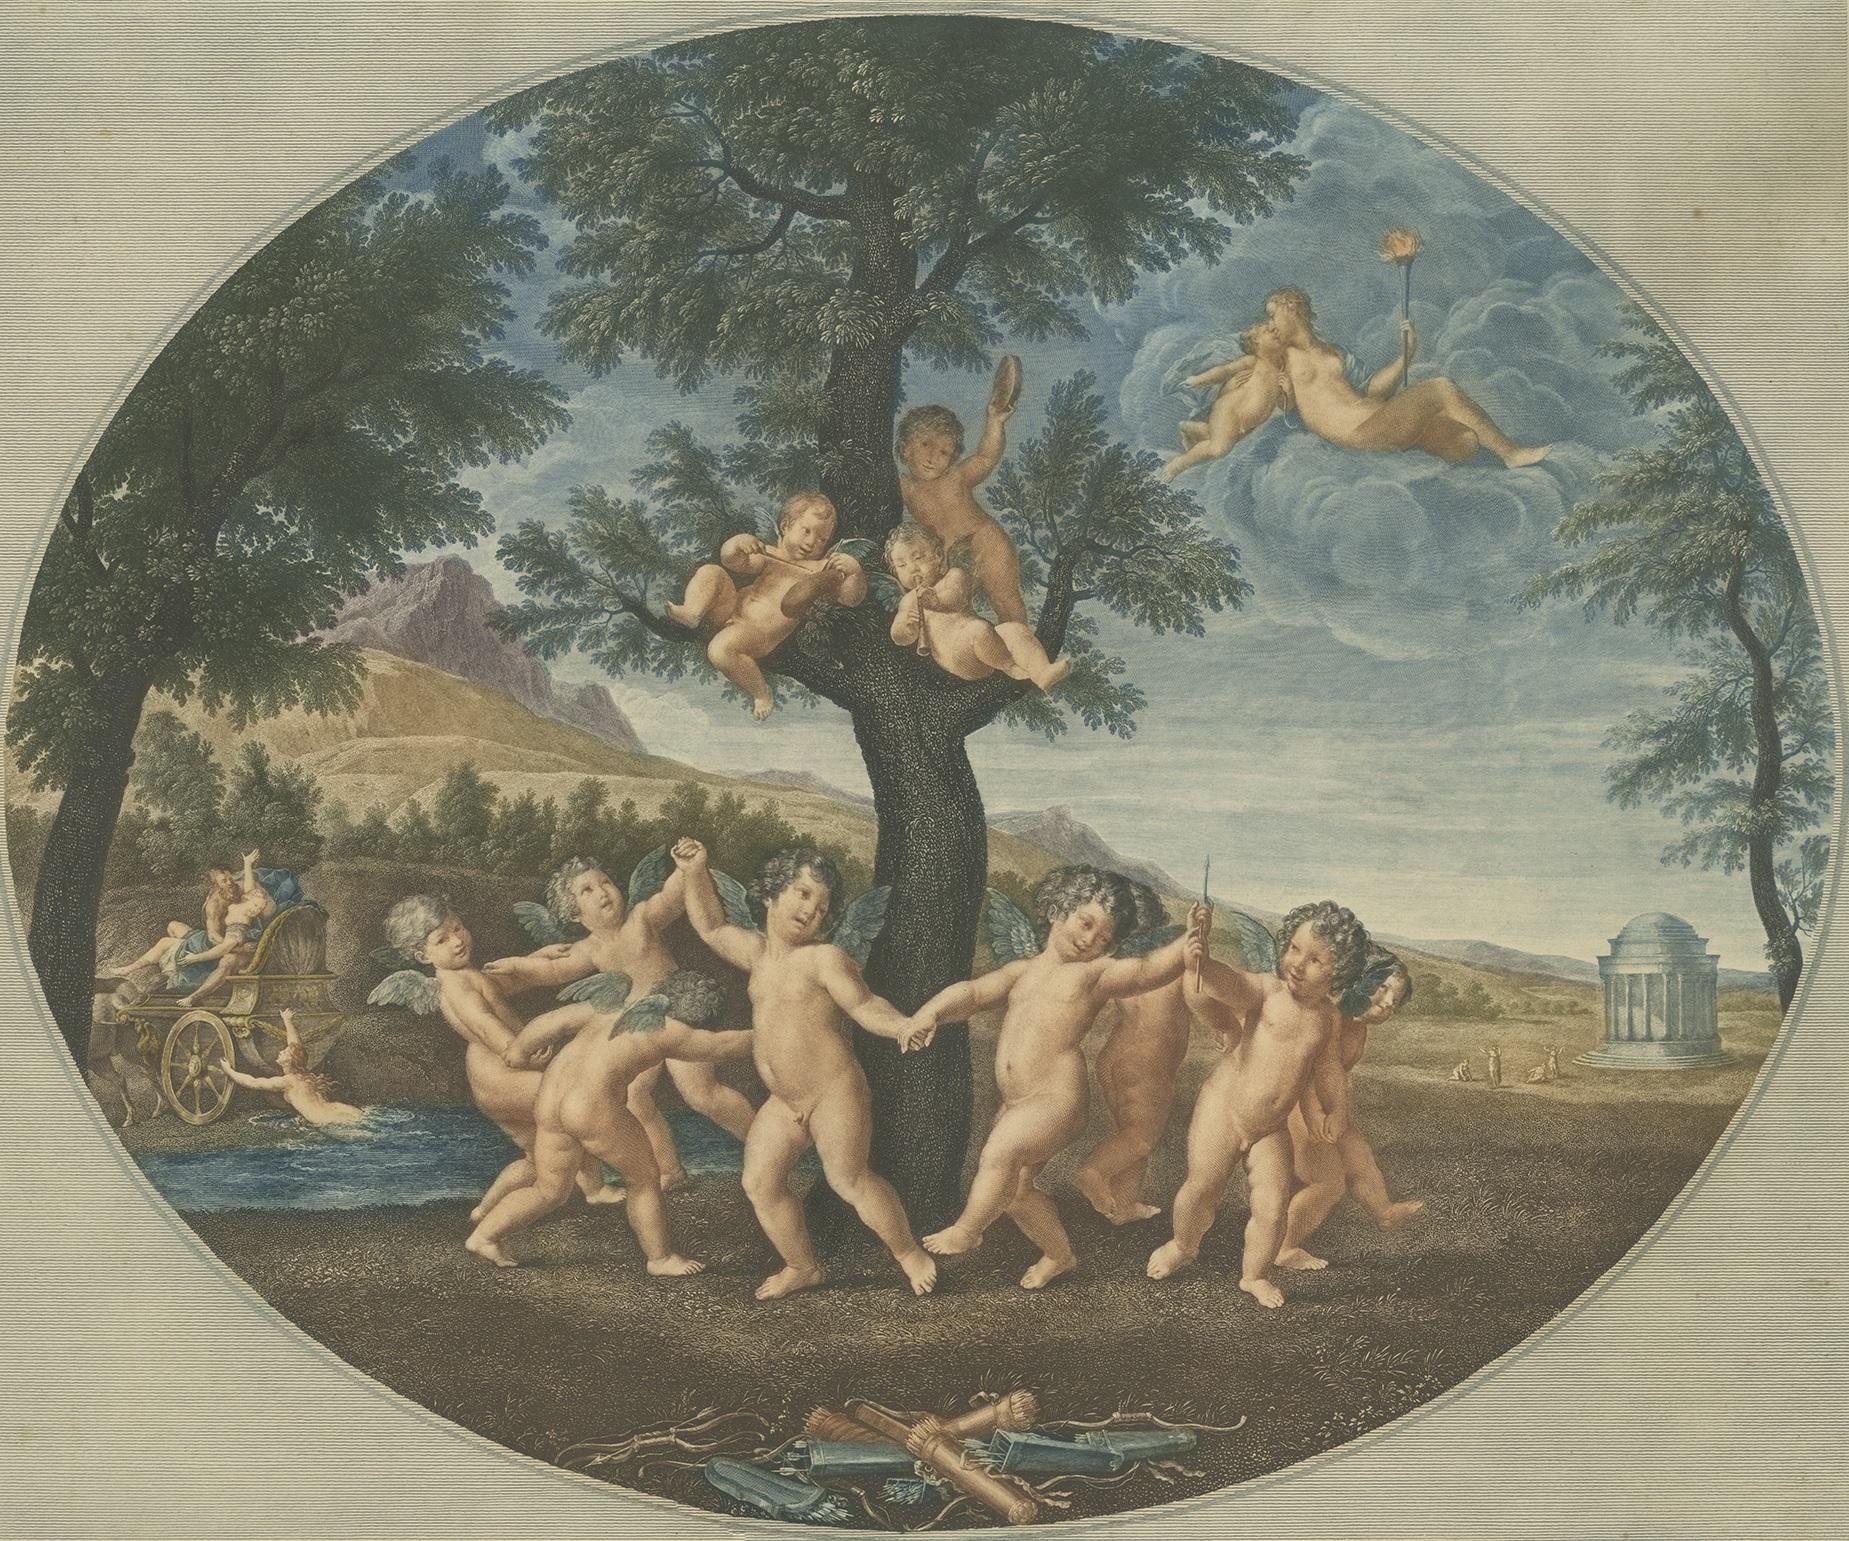 Antique print titled 'Amorettentanz'. Mythological print of amoretti dancing around a monument to the god Amor. They are celebrating the abduction of Proserpina by Pluto. This incident is related in two side scenes. Amor is the companion of the